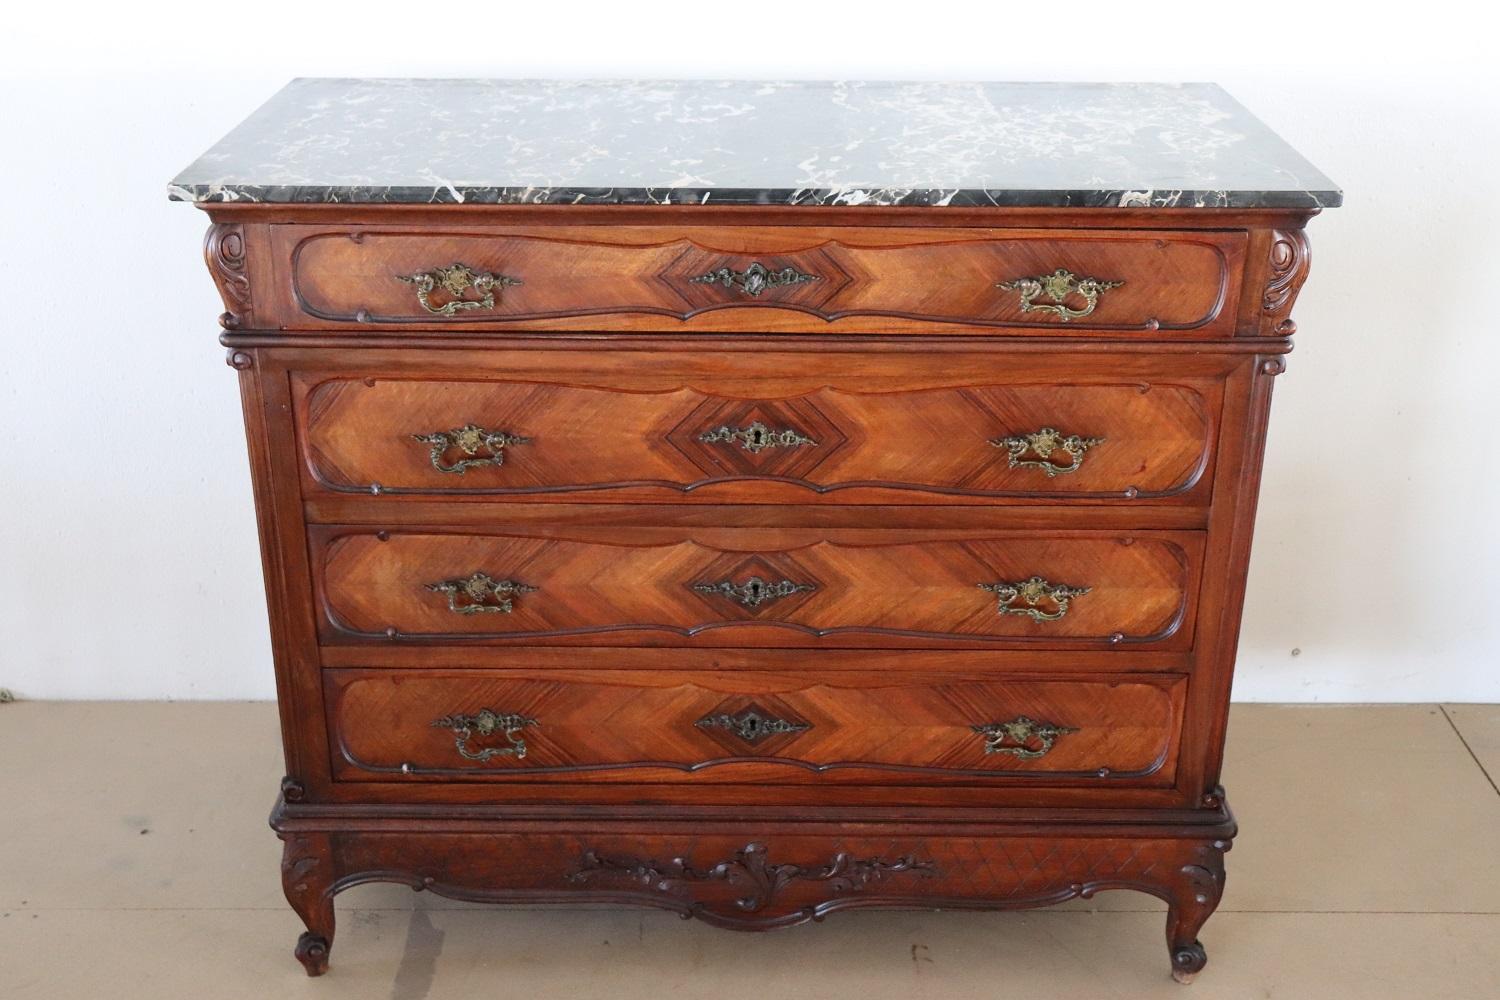 Rare and fine quality Italian antique chest of drawers, 1930. Precious solid walnut wood. Equipped with four comfortable drawers. Top in fine and rare Italian marble 